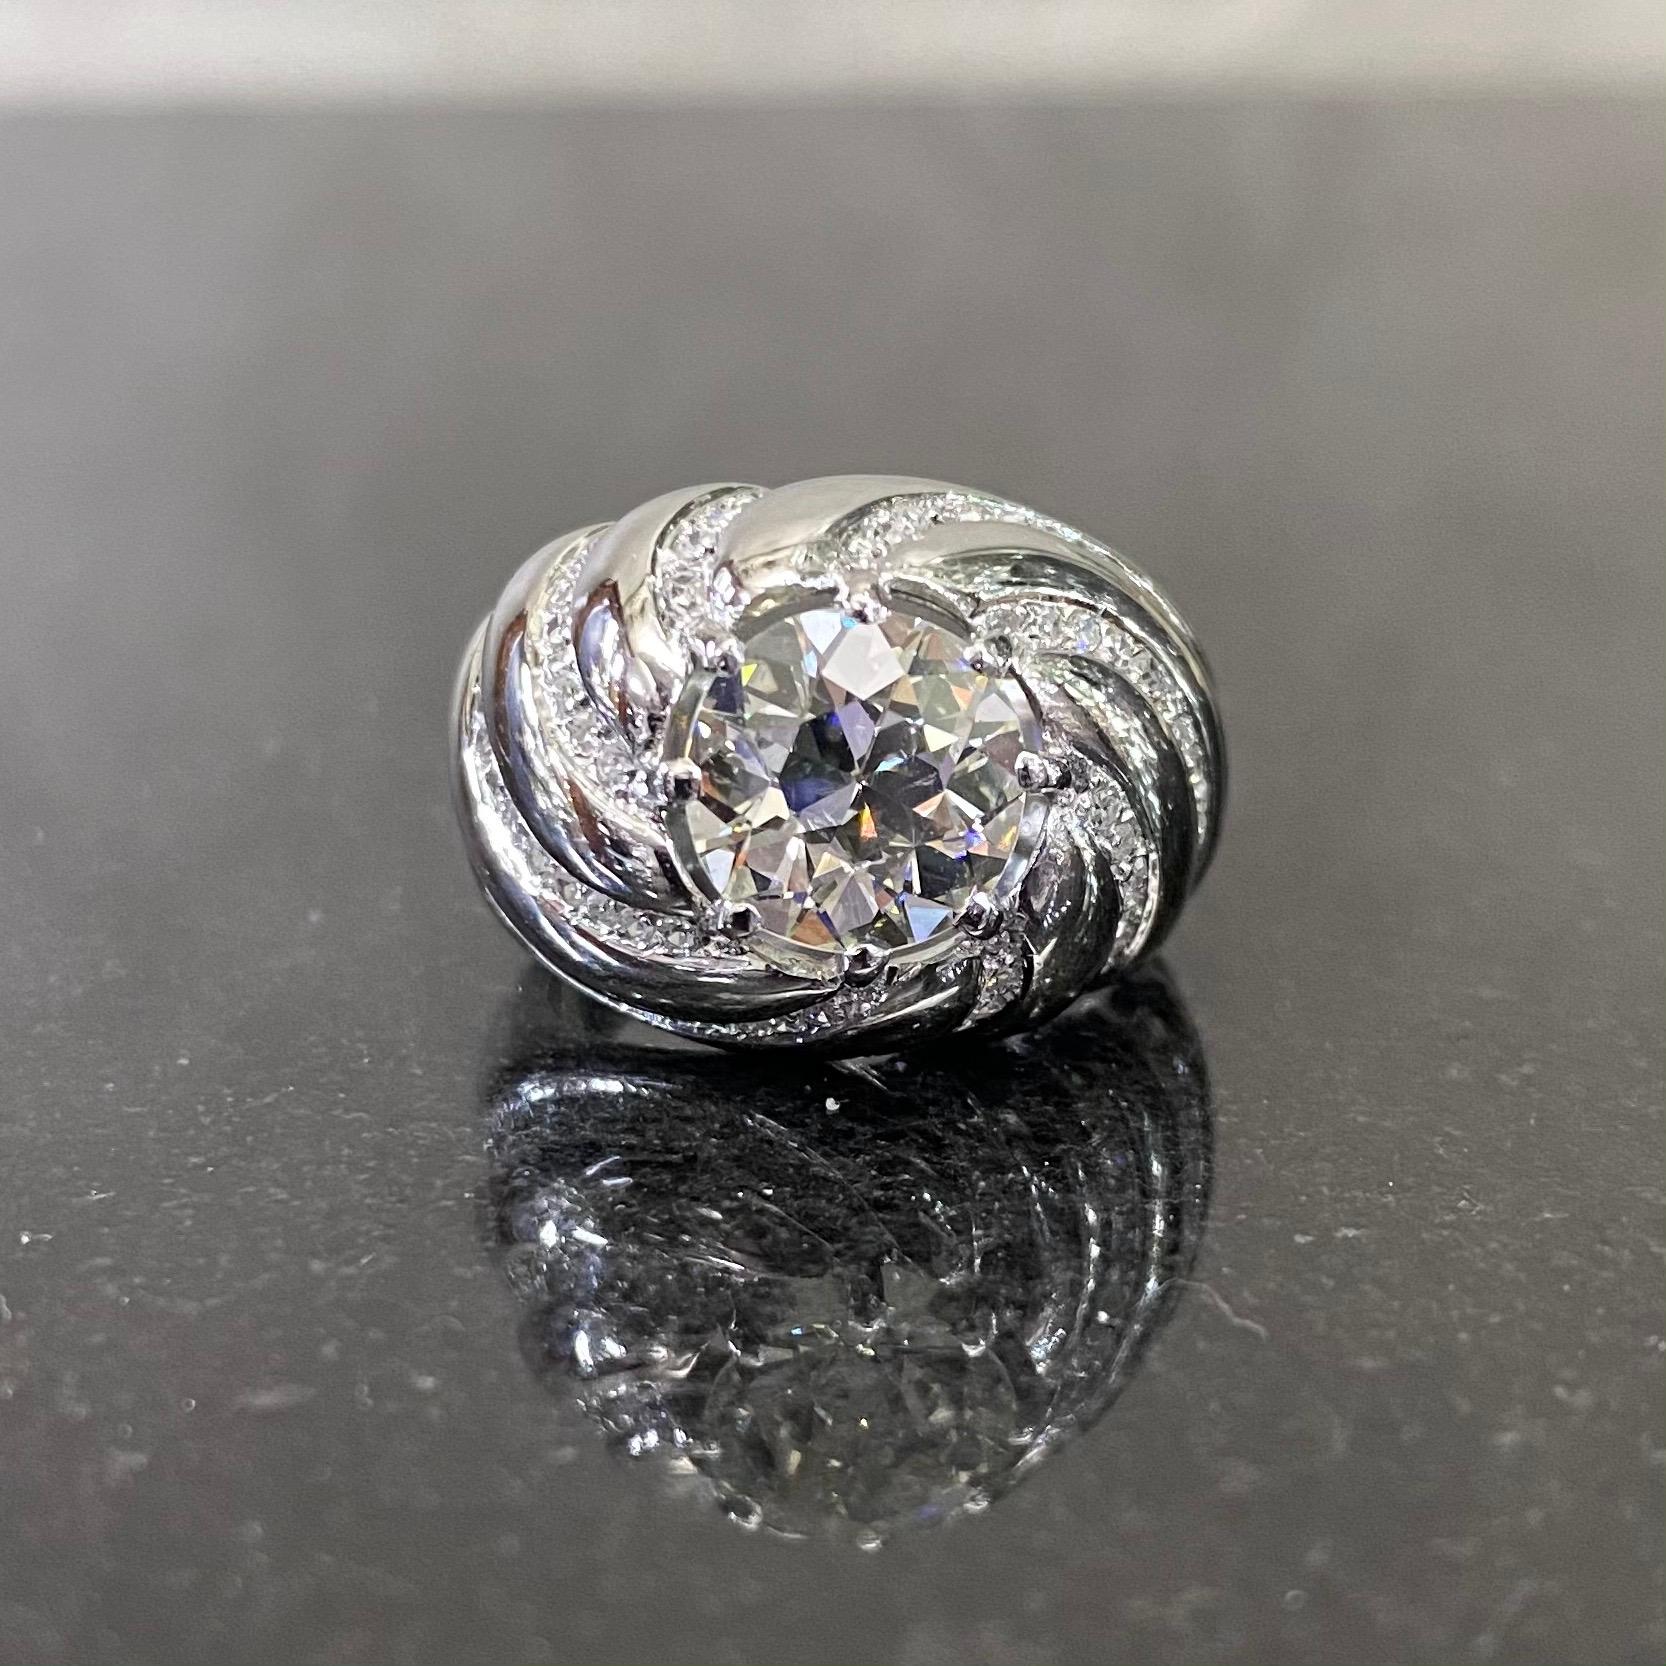 A vintage Old European brilliant-cut diamond spiraled bombe cocktail ring in platinum, Portuguese, 1950s. This mid-20th century ring of a bombe design features an Old European brilliant-cut diamond eight claw-set to the center and is further